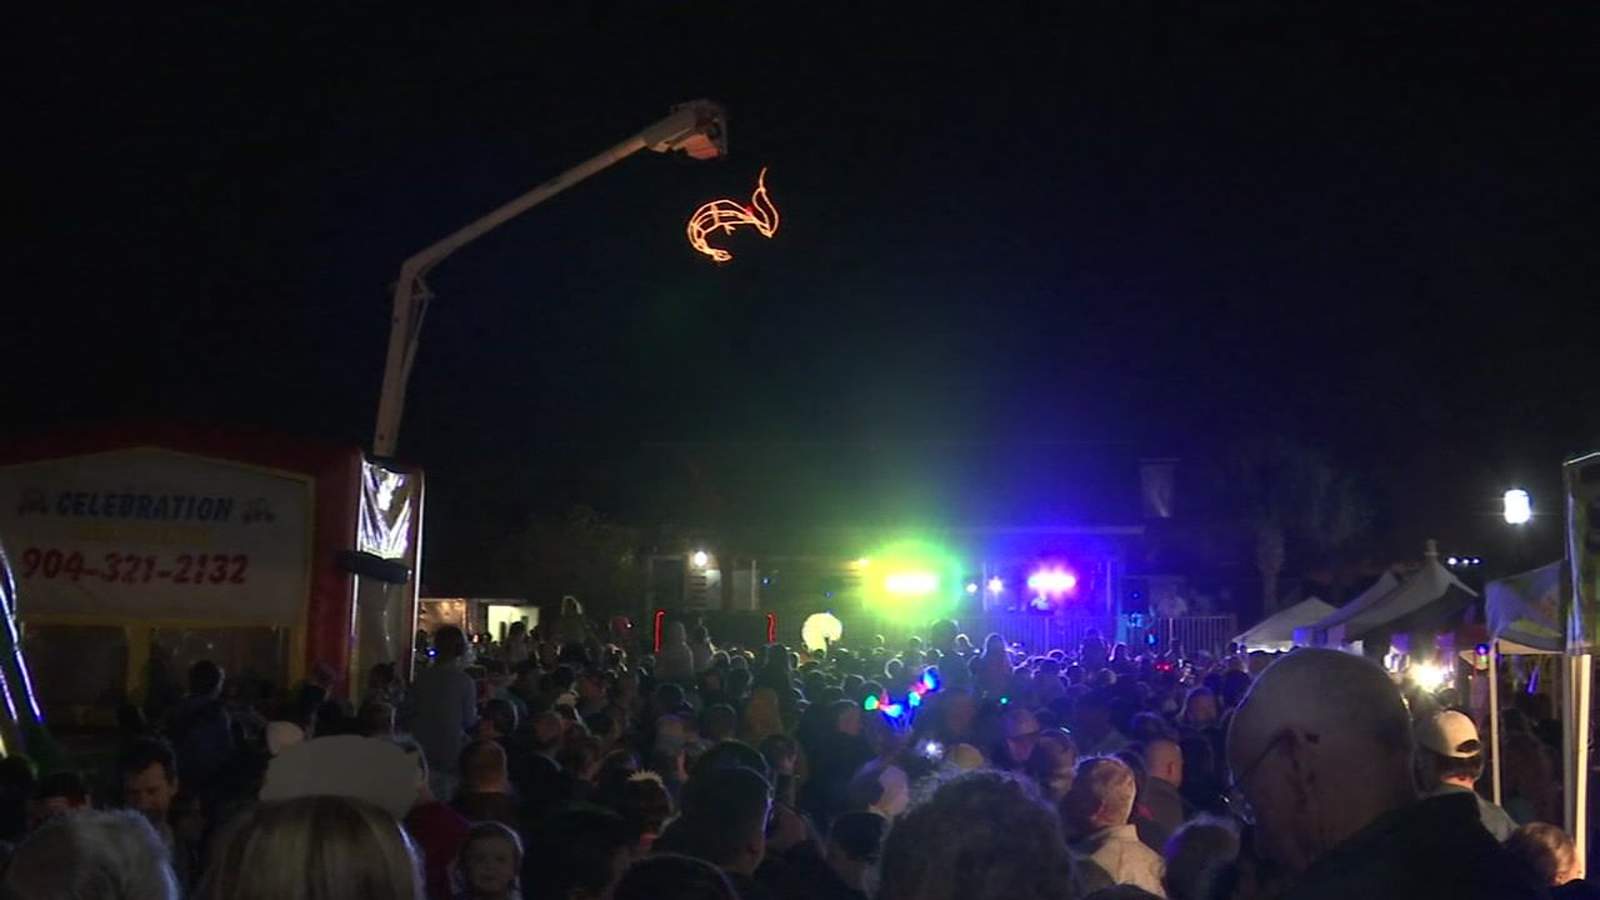 Plans for Fernandina Beach’s holiday events moving forward for now